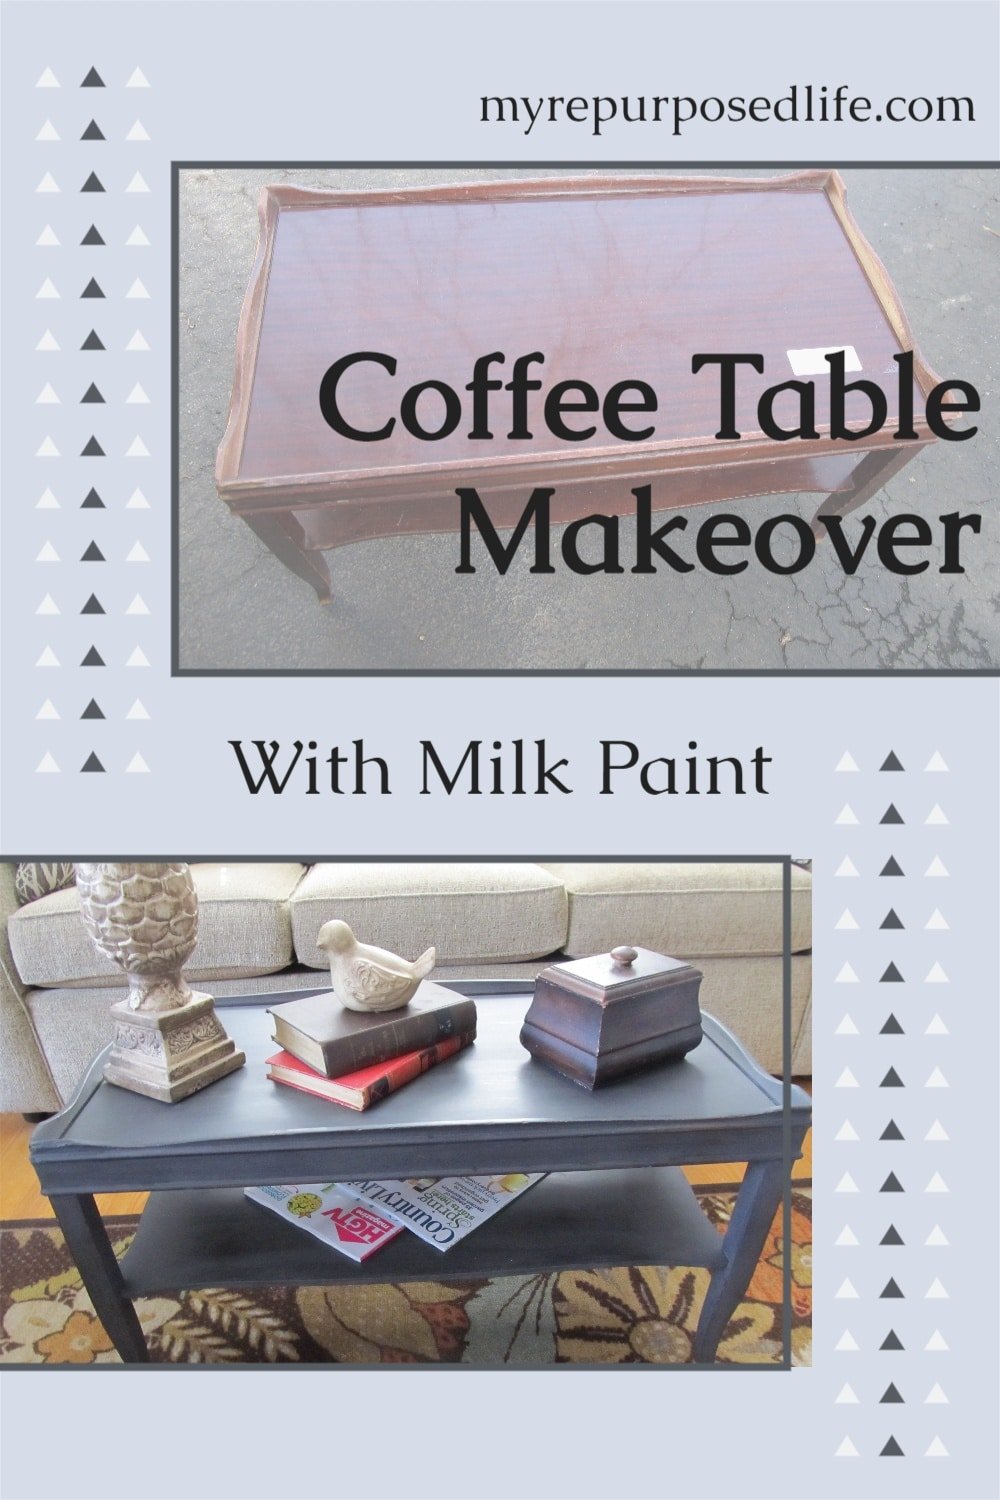 How to do a quick and easy milk paint makeover on a two tiered thrift store coffee table. Easy step by step directions. Do it yourself today! #MyRepurposedLife #upcycle #coffeetable #milkpaint via @repurposedlife